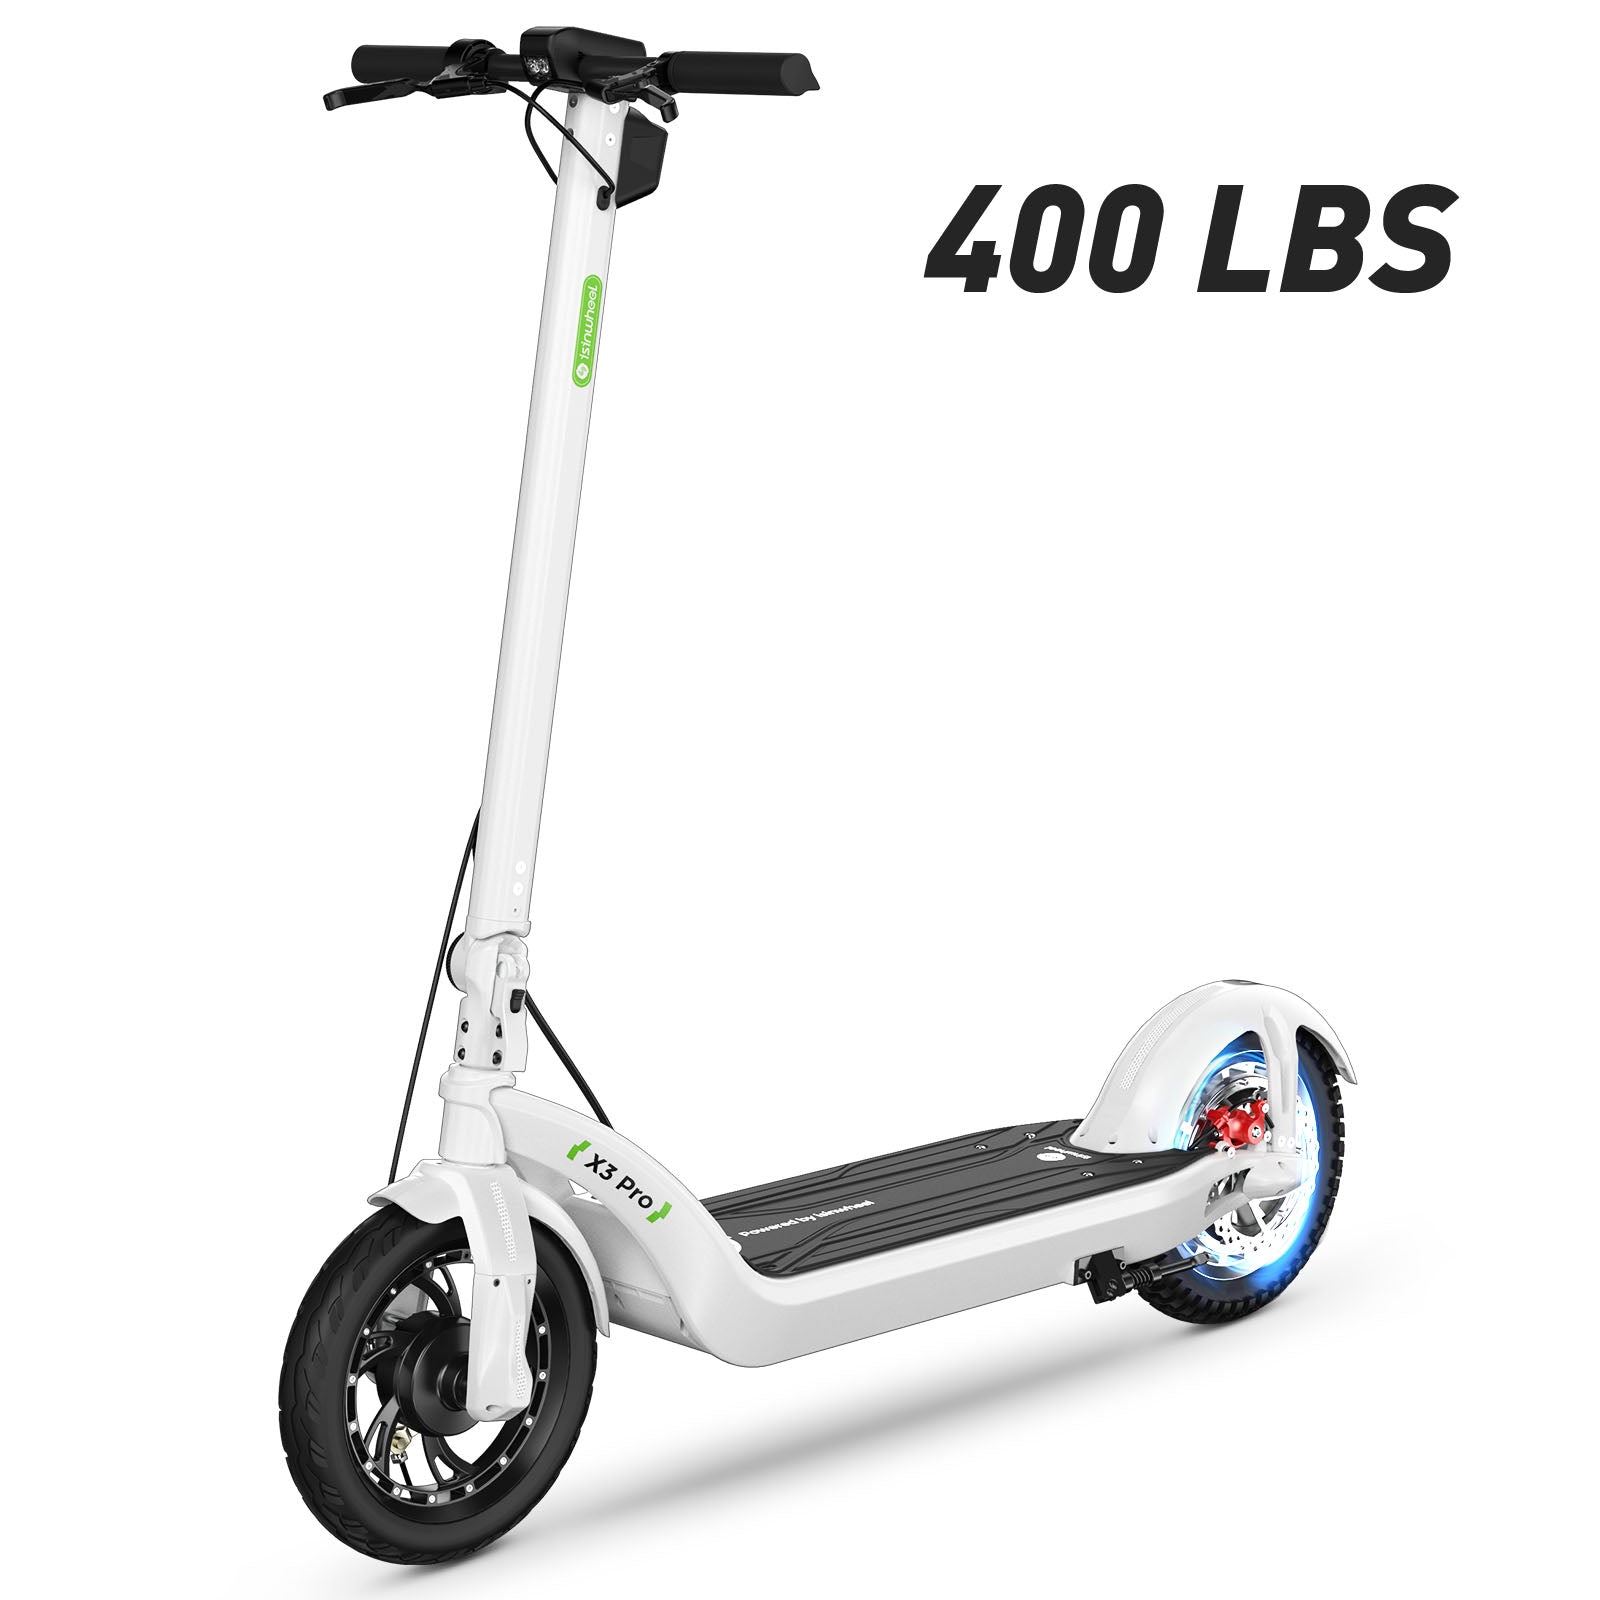 X3Pro 1200W Commuting Electric Scooter,12-inch Fat Tire,Maximum Load 400lbs